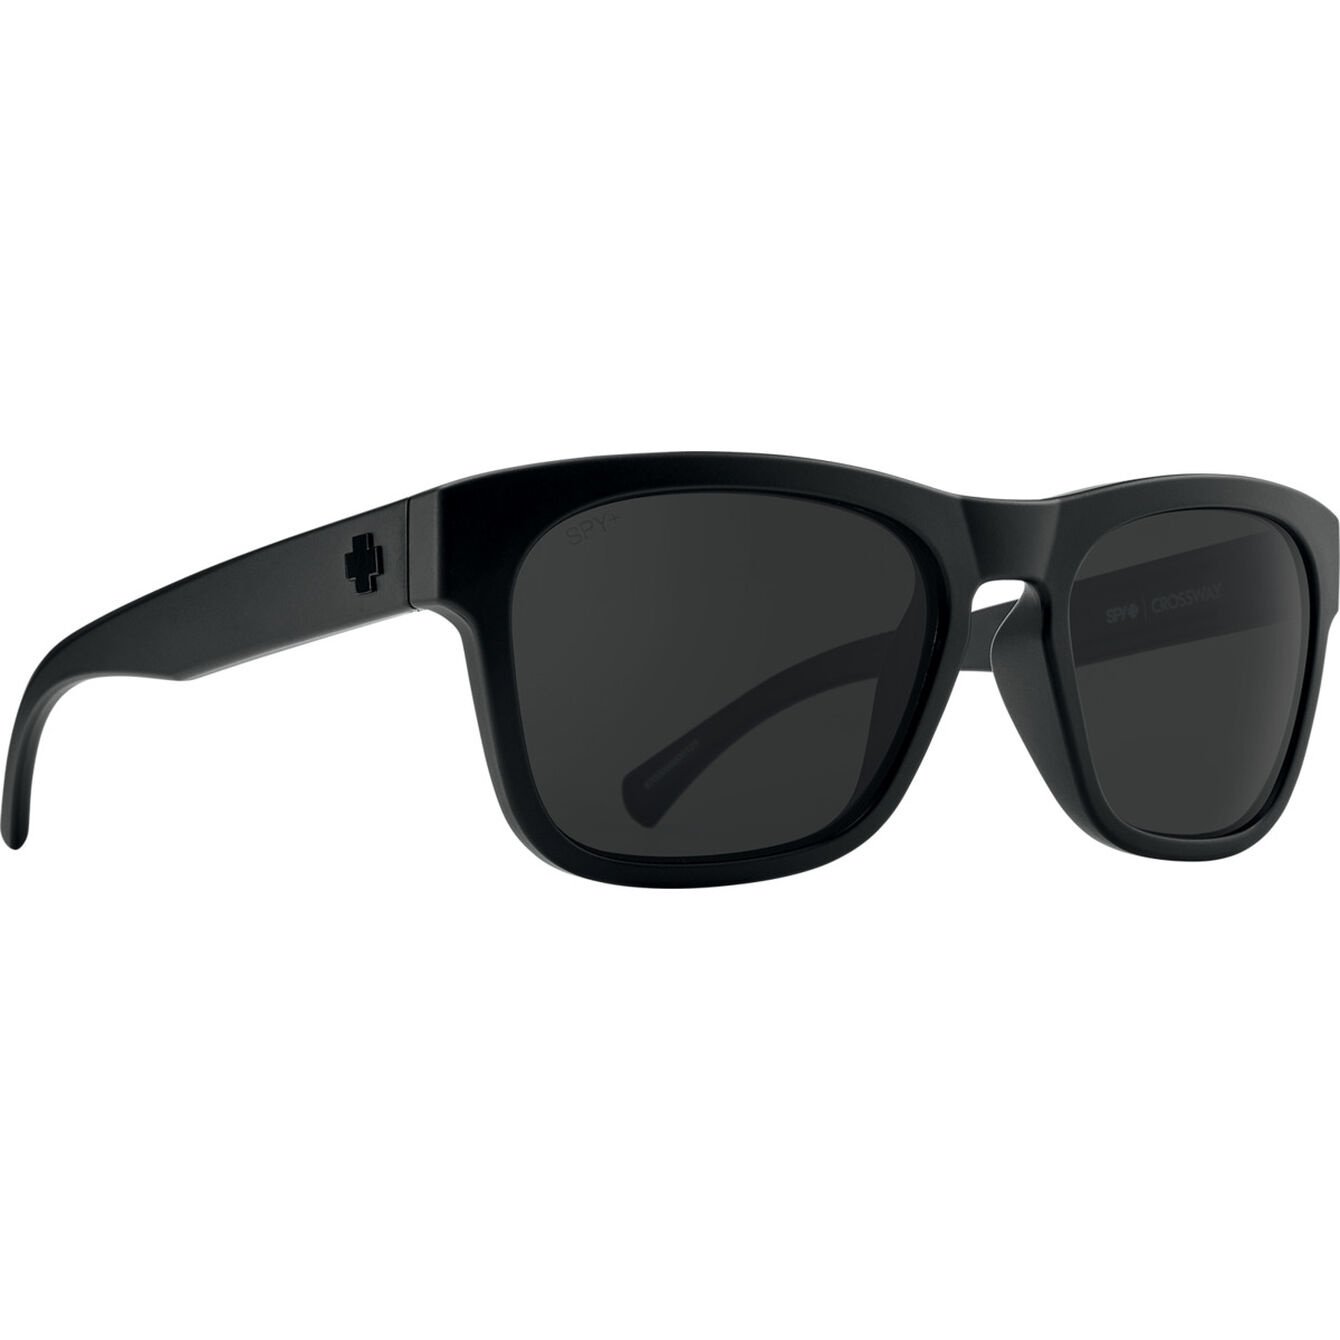 See Behind You with Stylish Spy Shades - ScientificsOnline.com